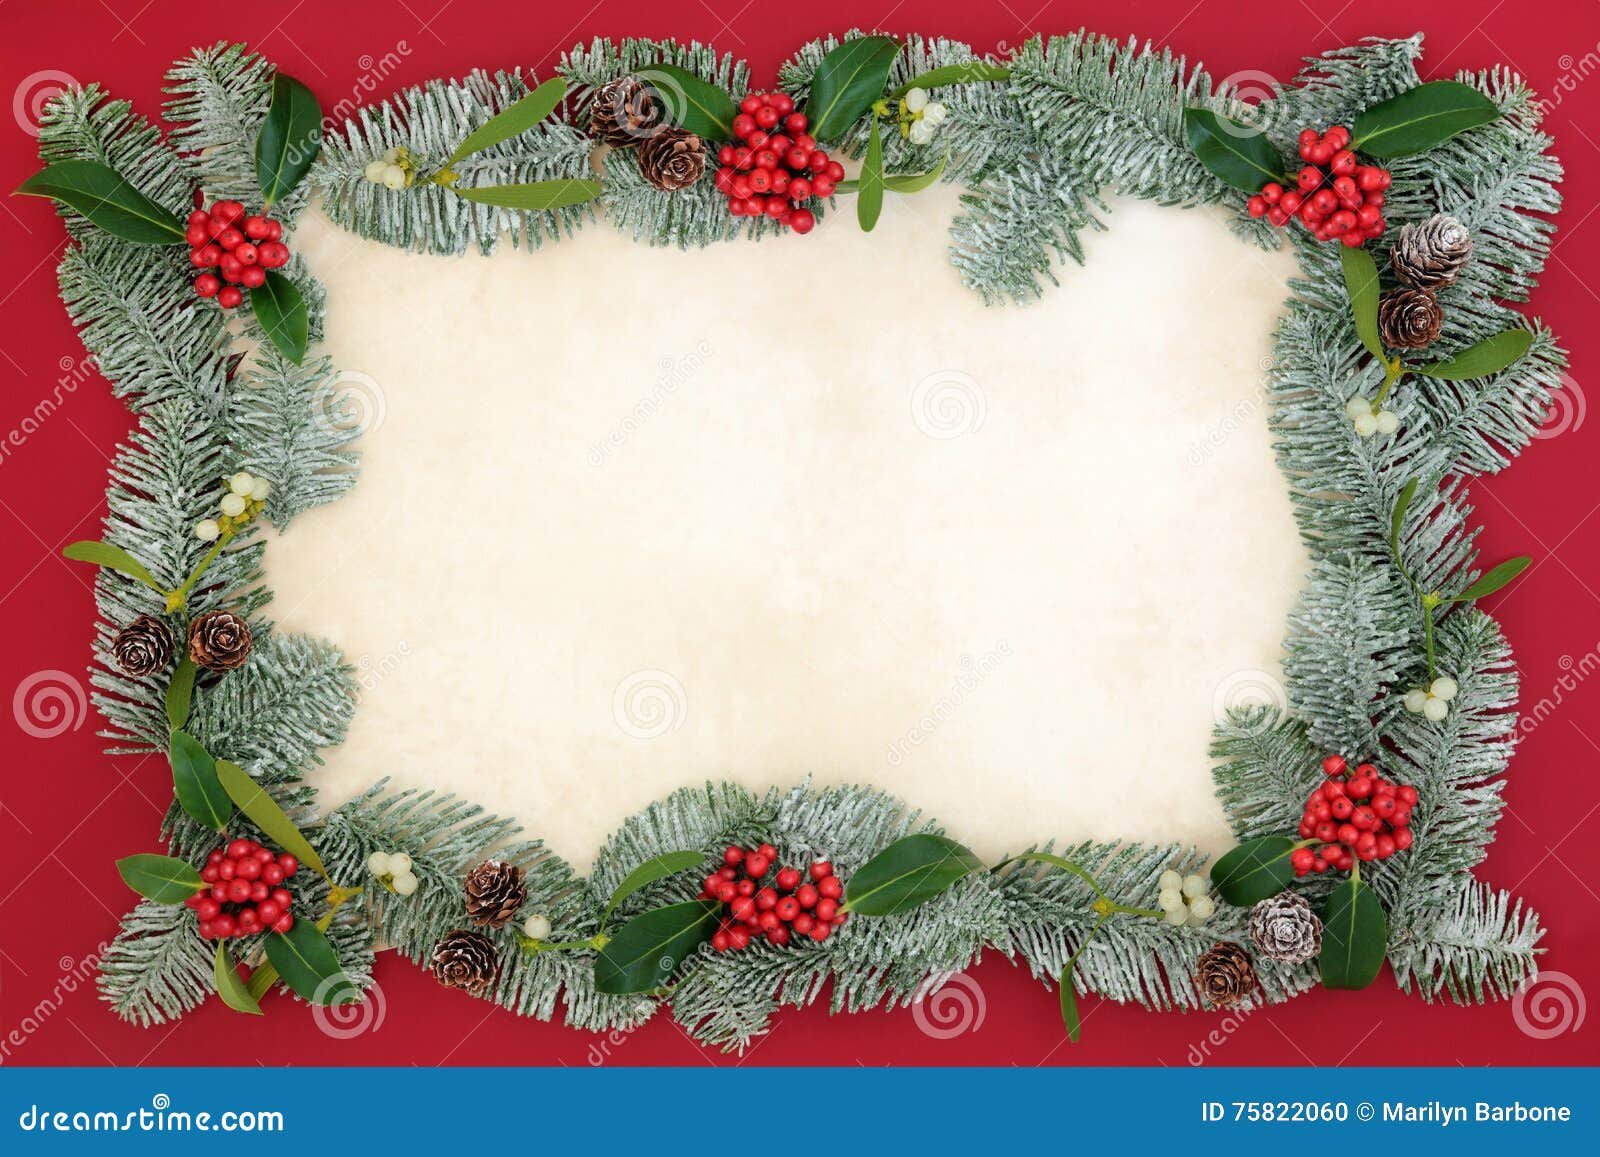 Traditional Christmas Border Stock Photo - Image of parchment ...